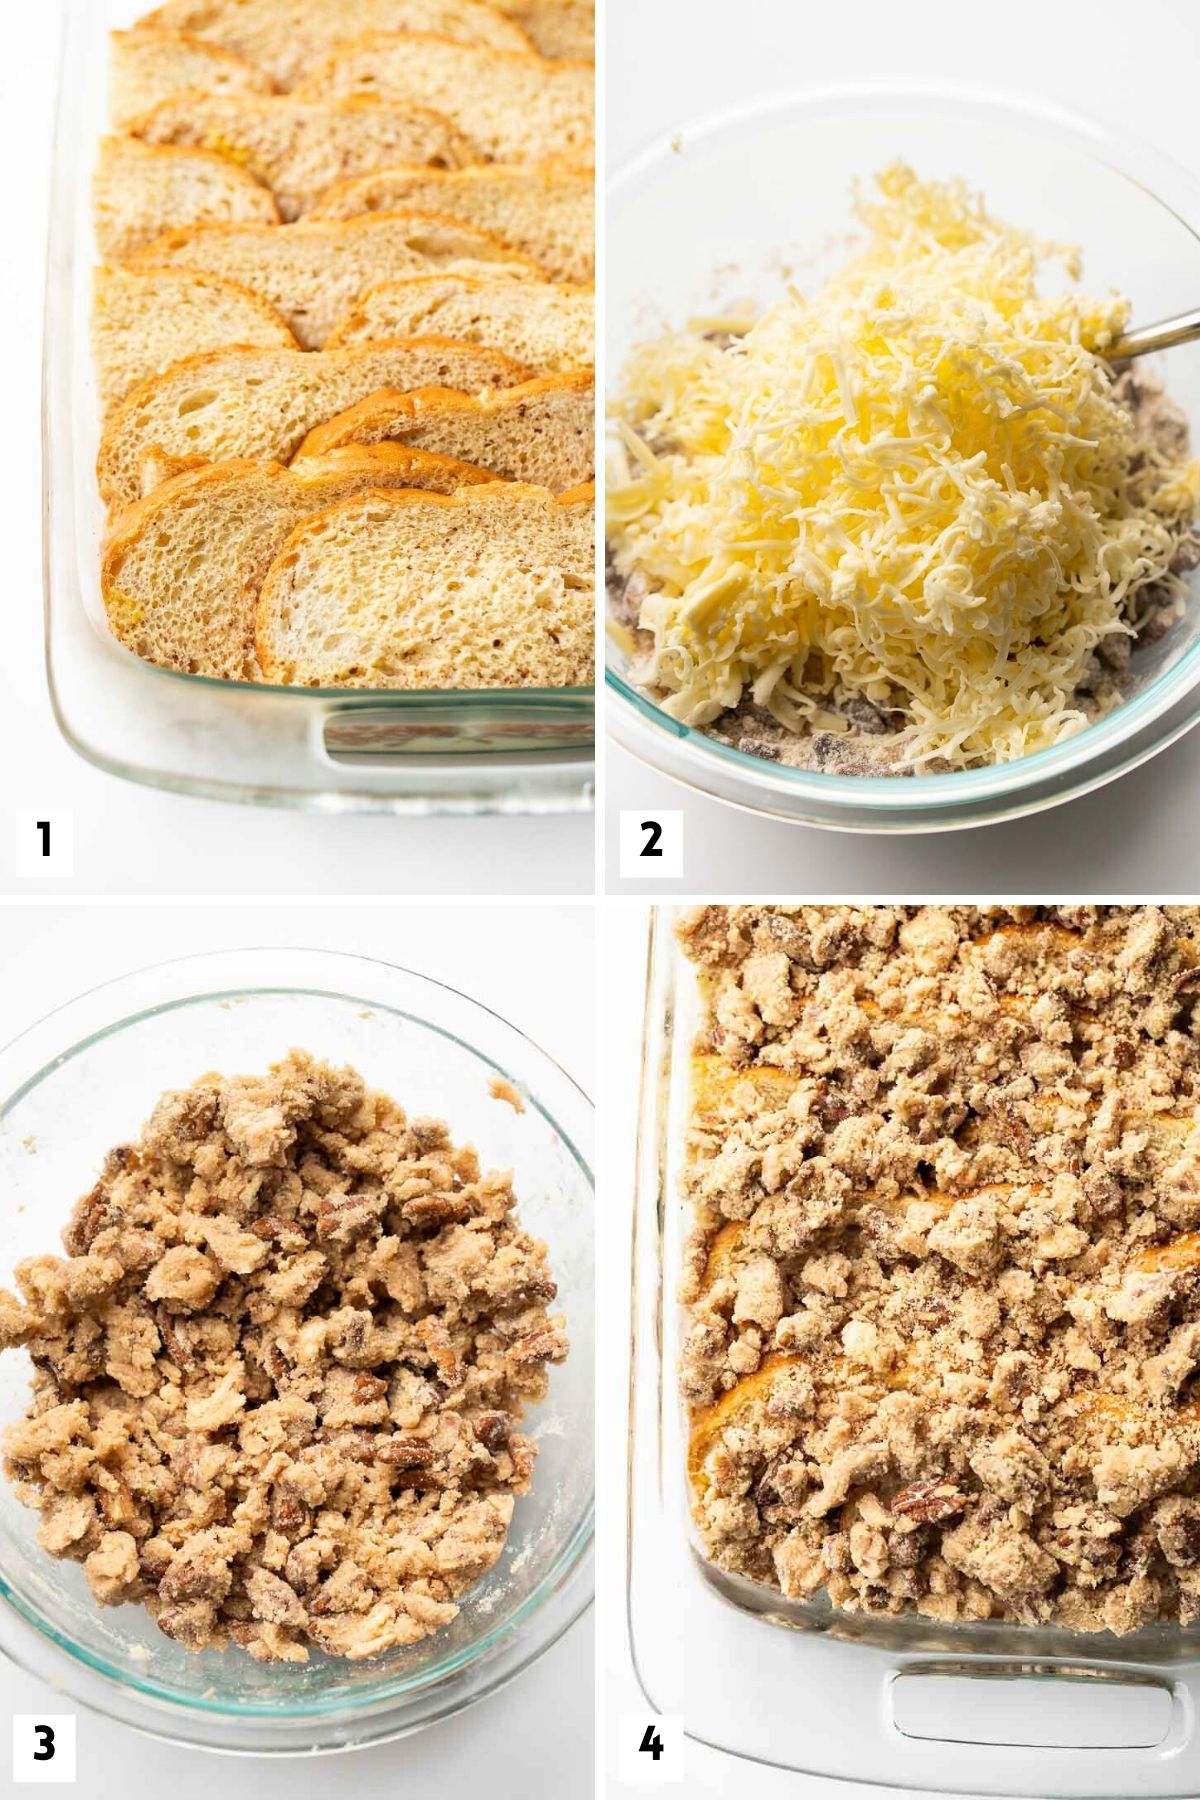 Steps for making an overnight French toast casserole.